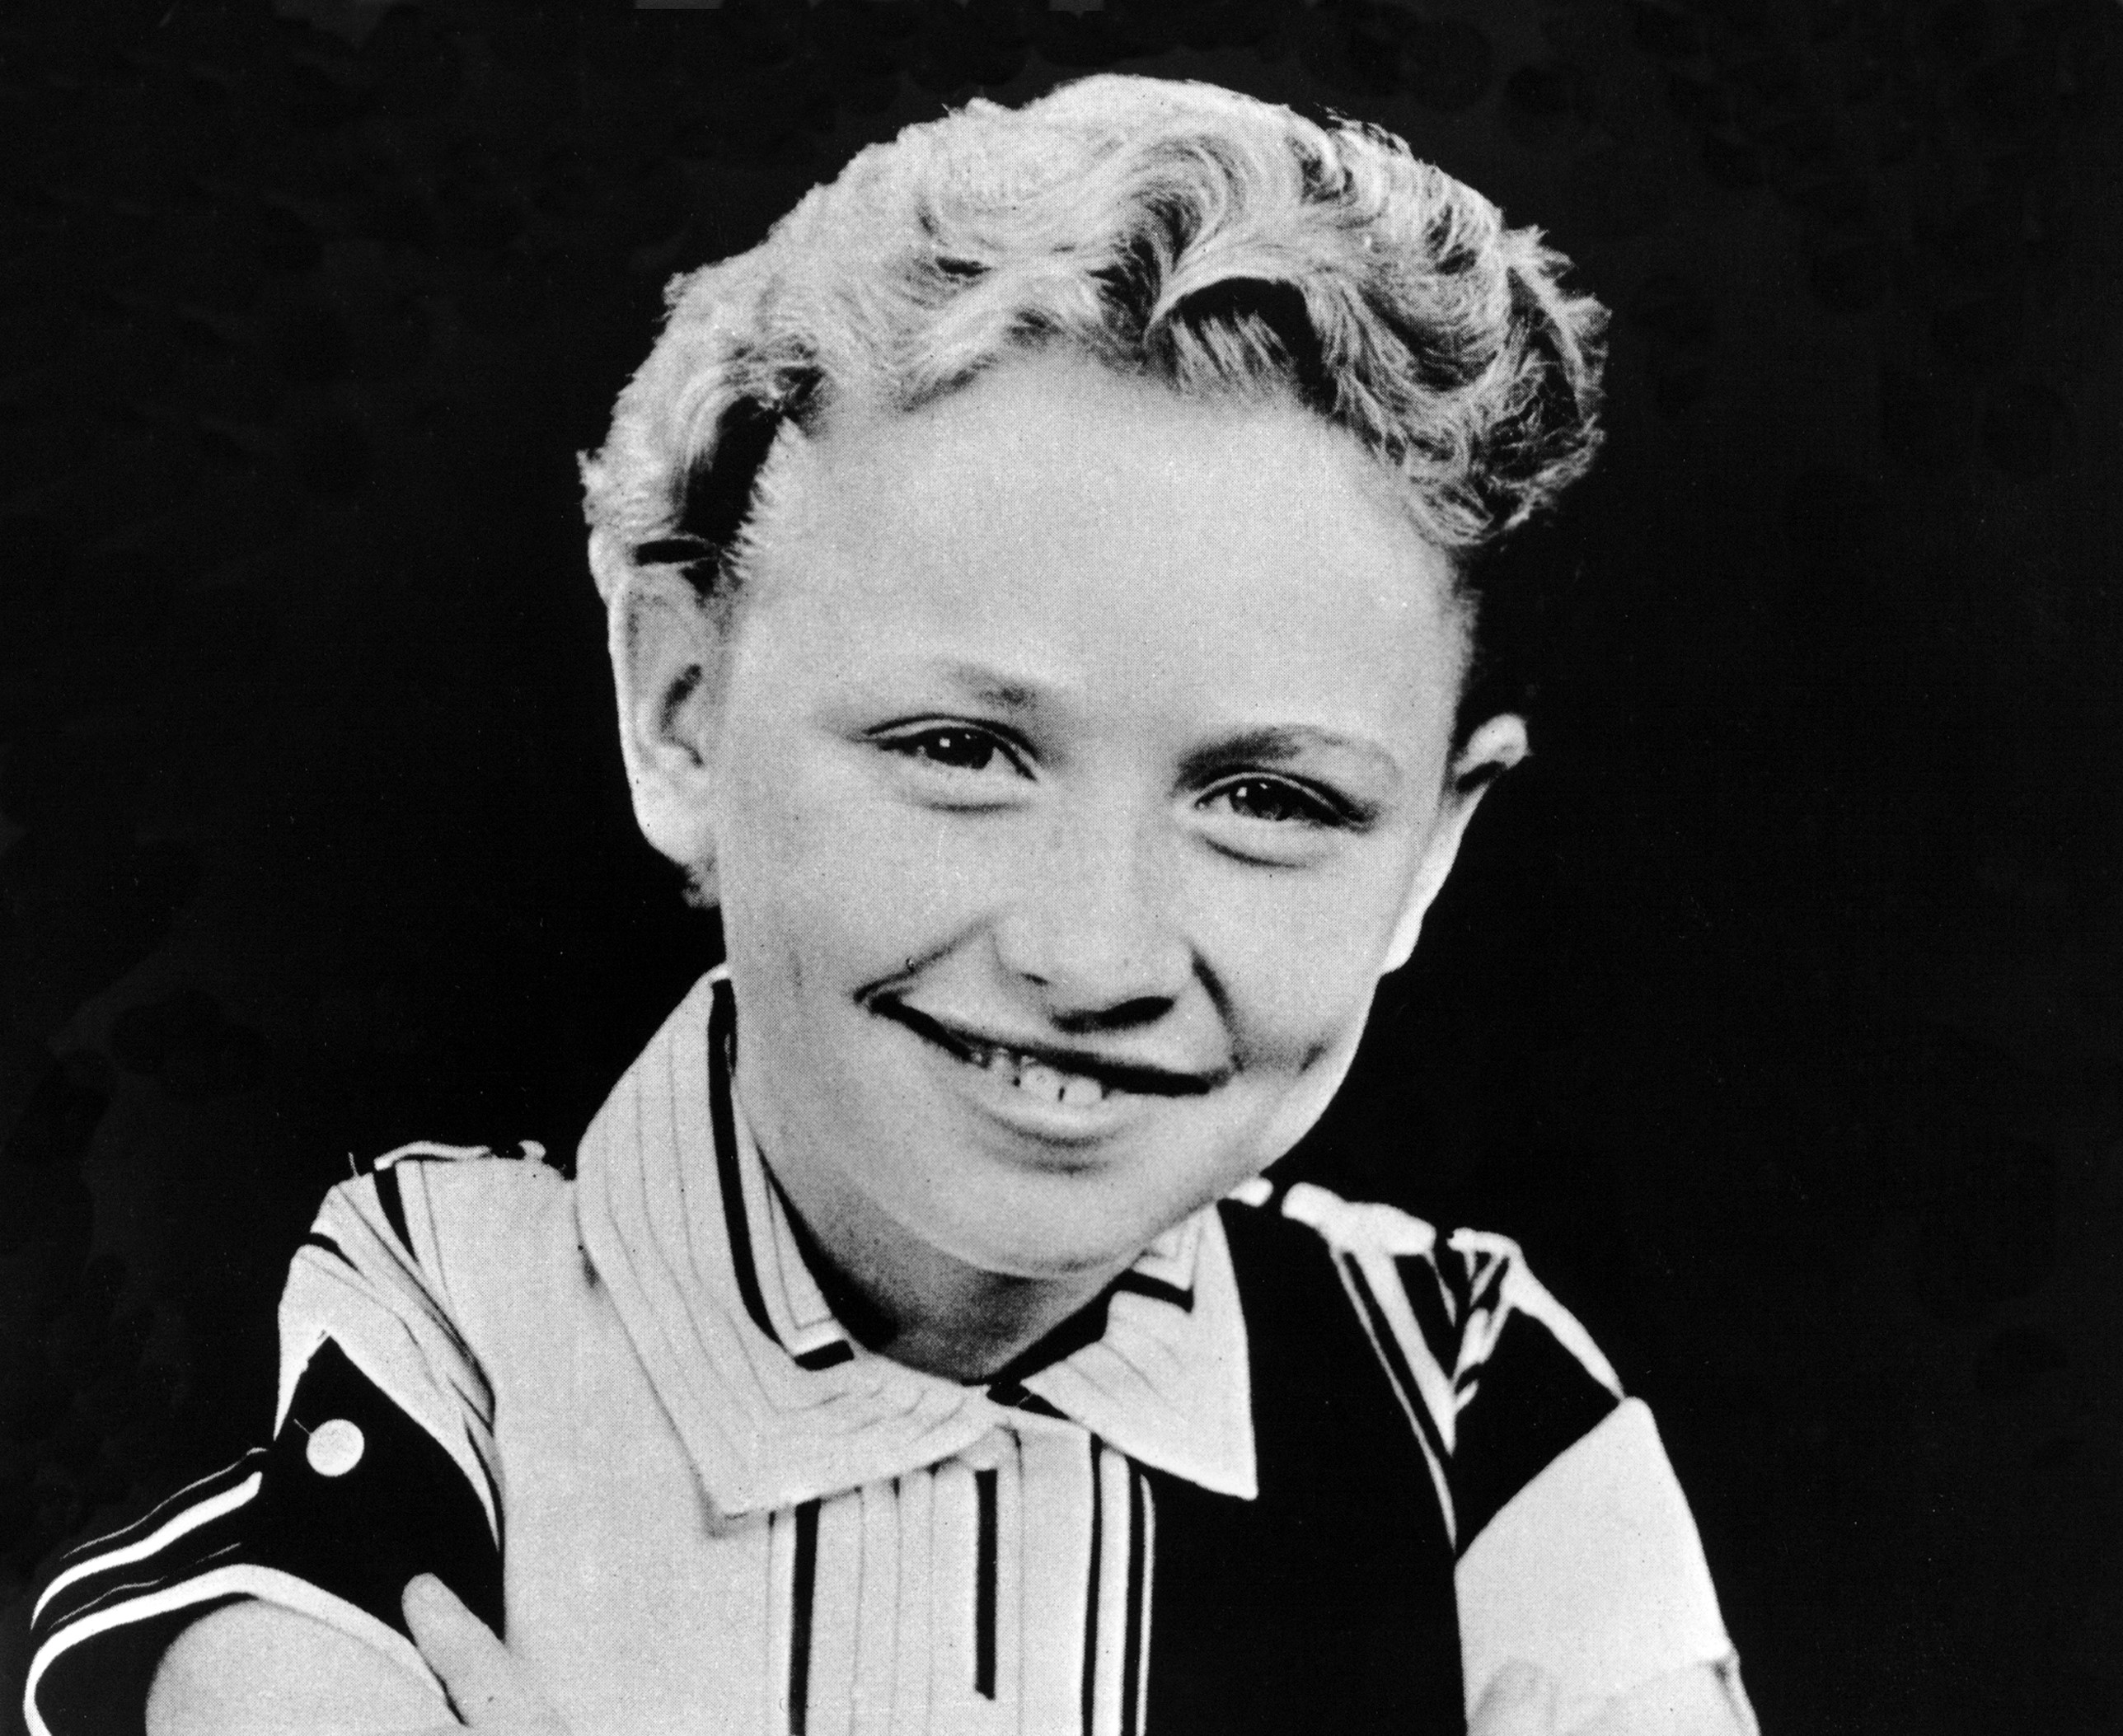 A black and white photo of Dolly Parton as a child. She wears a black and white striped shirt.